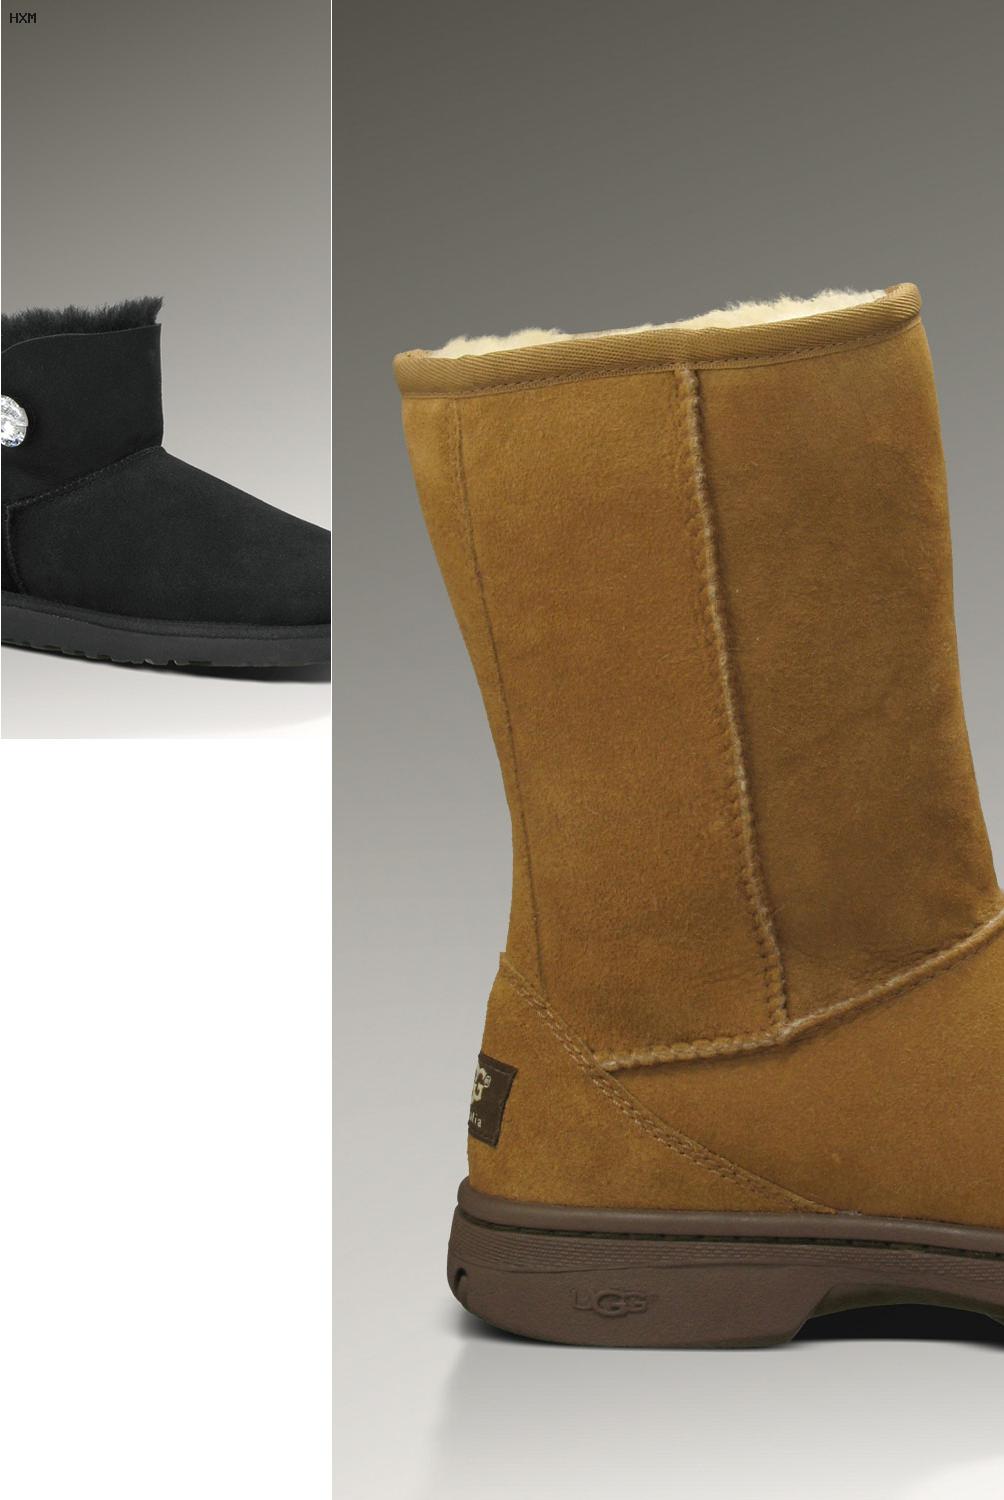 ugg boots chermside shopping centre